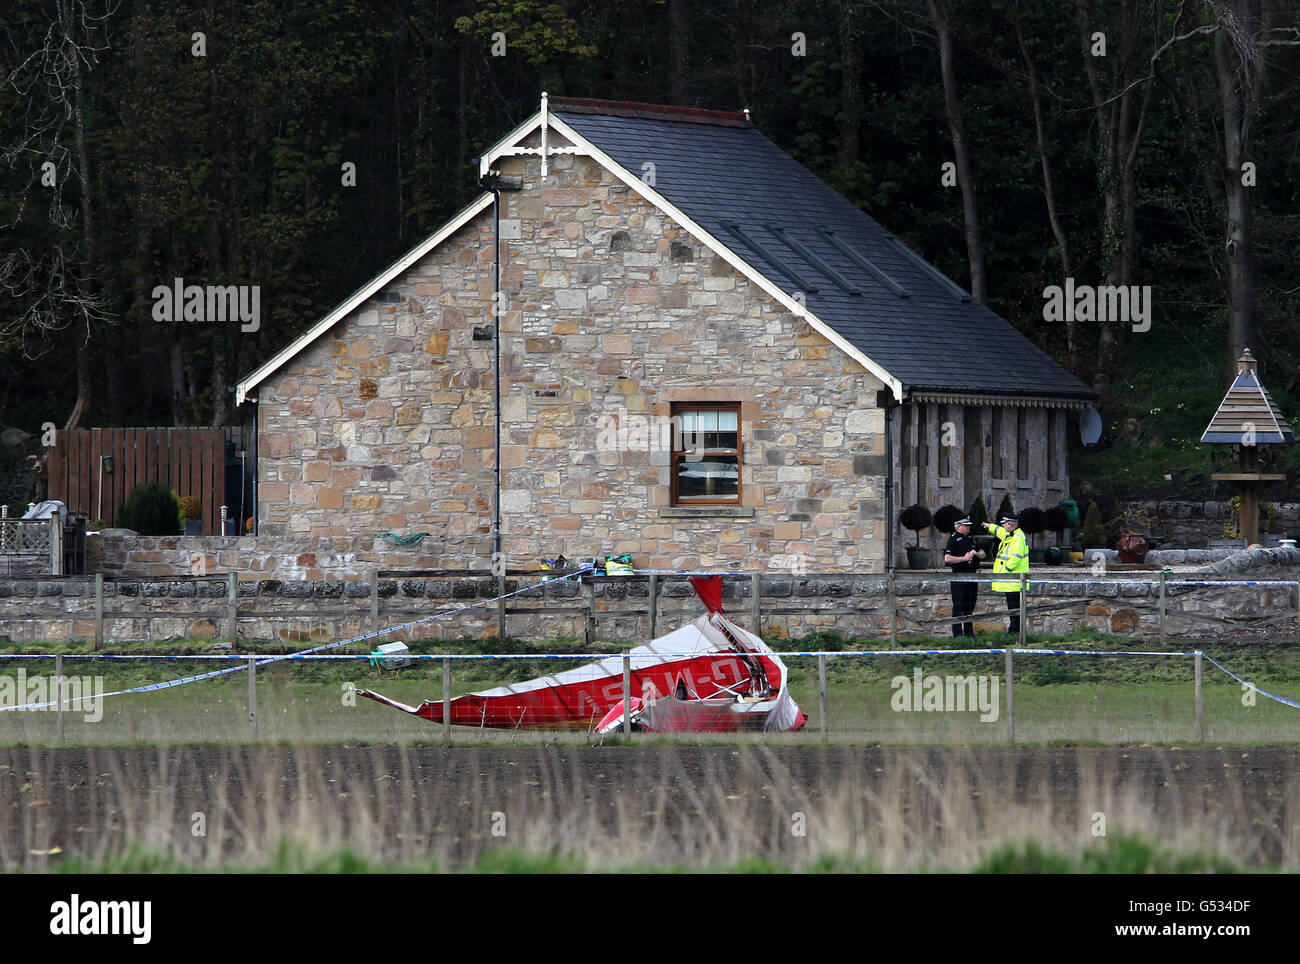 The scene of a microlight crash close to Kennet village near Clackmannan. Central Scotland Police said one man was killed and no-one else was thought to have been involved. PRESS ASSOCIATION Photo. Picture date: Thursday April 12, 2012. See PA story AIR Microlight. Photo credit should read: Andrew Milligan/PA Wire Stock Photo